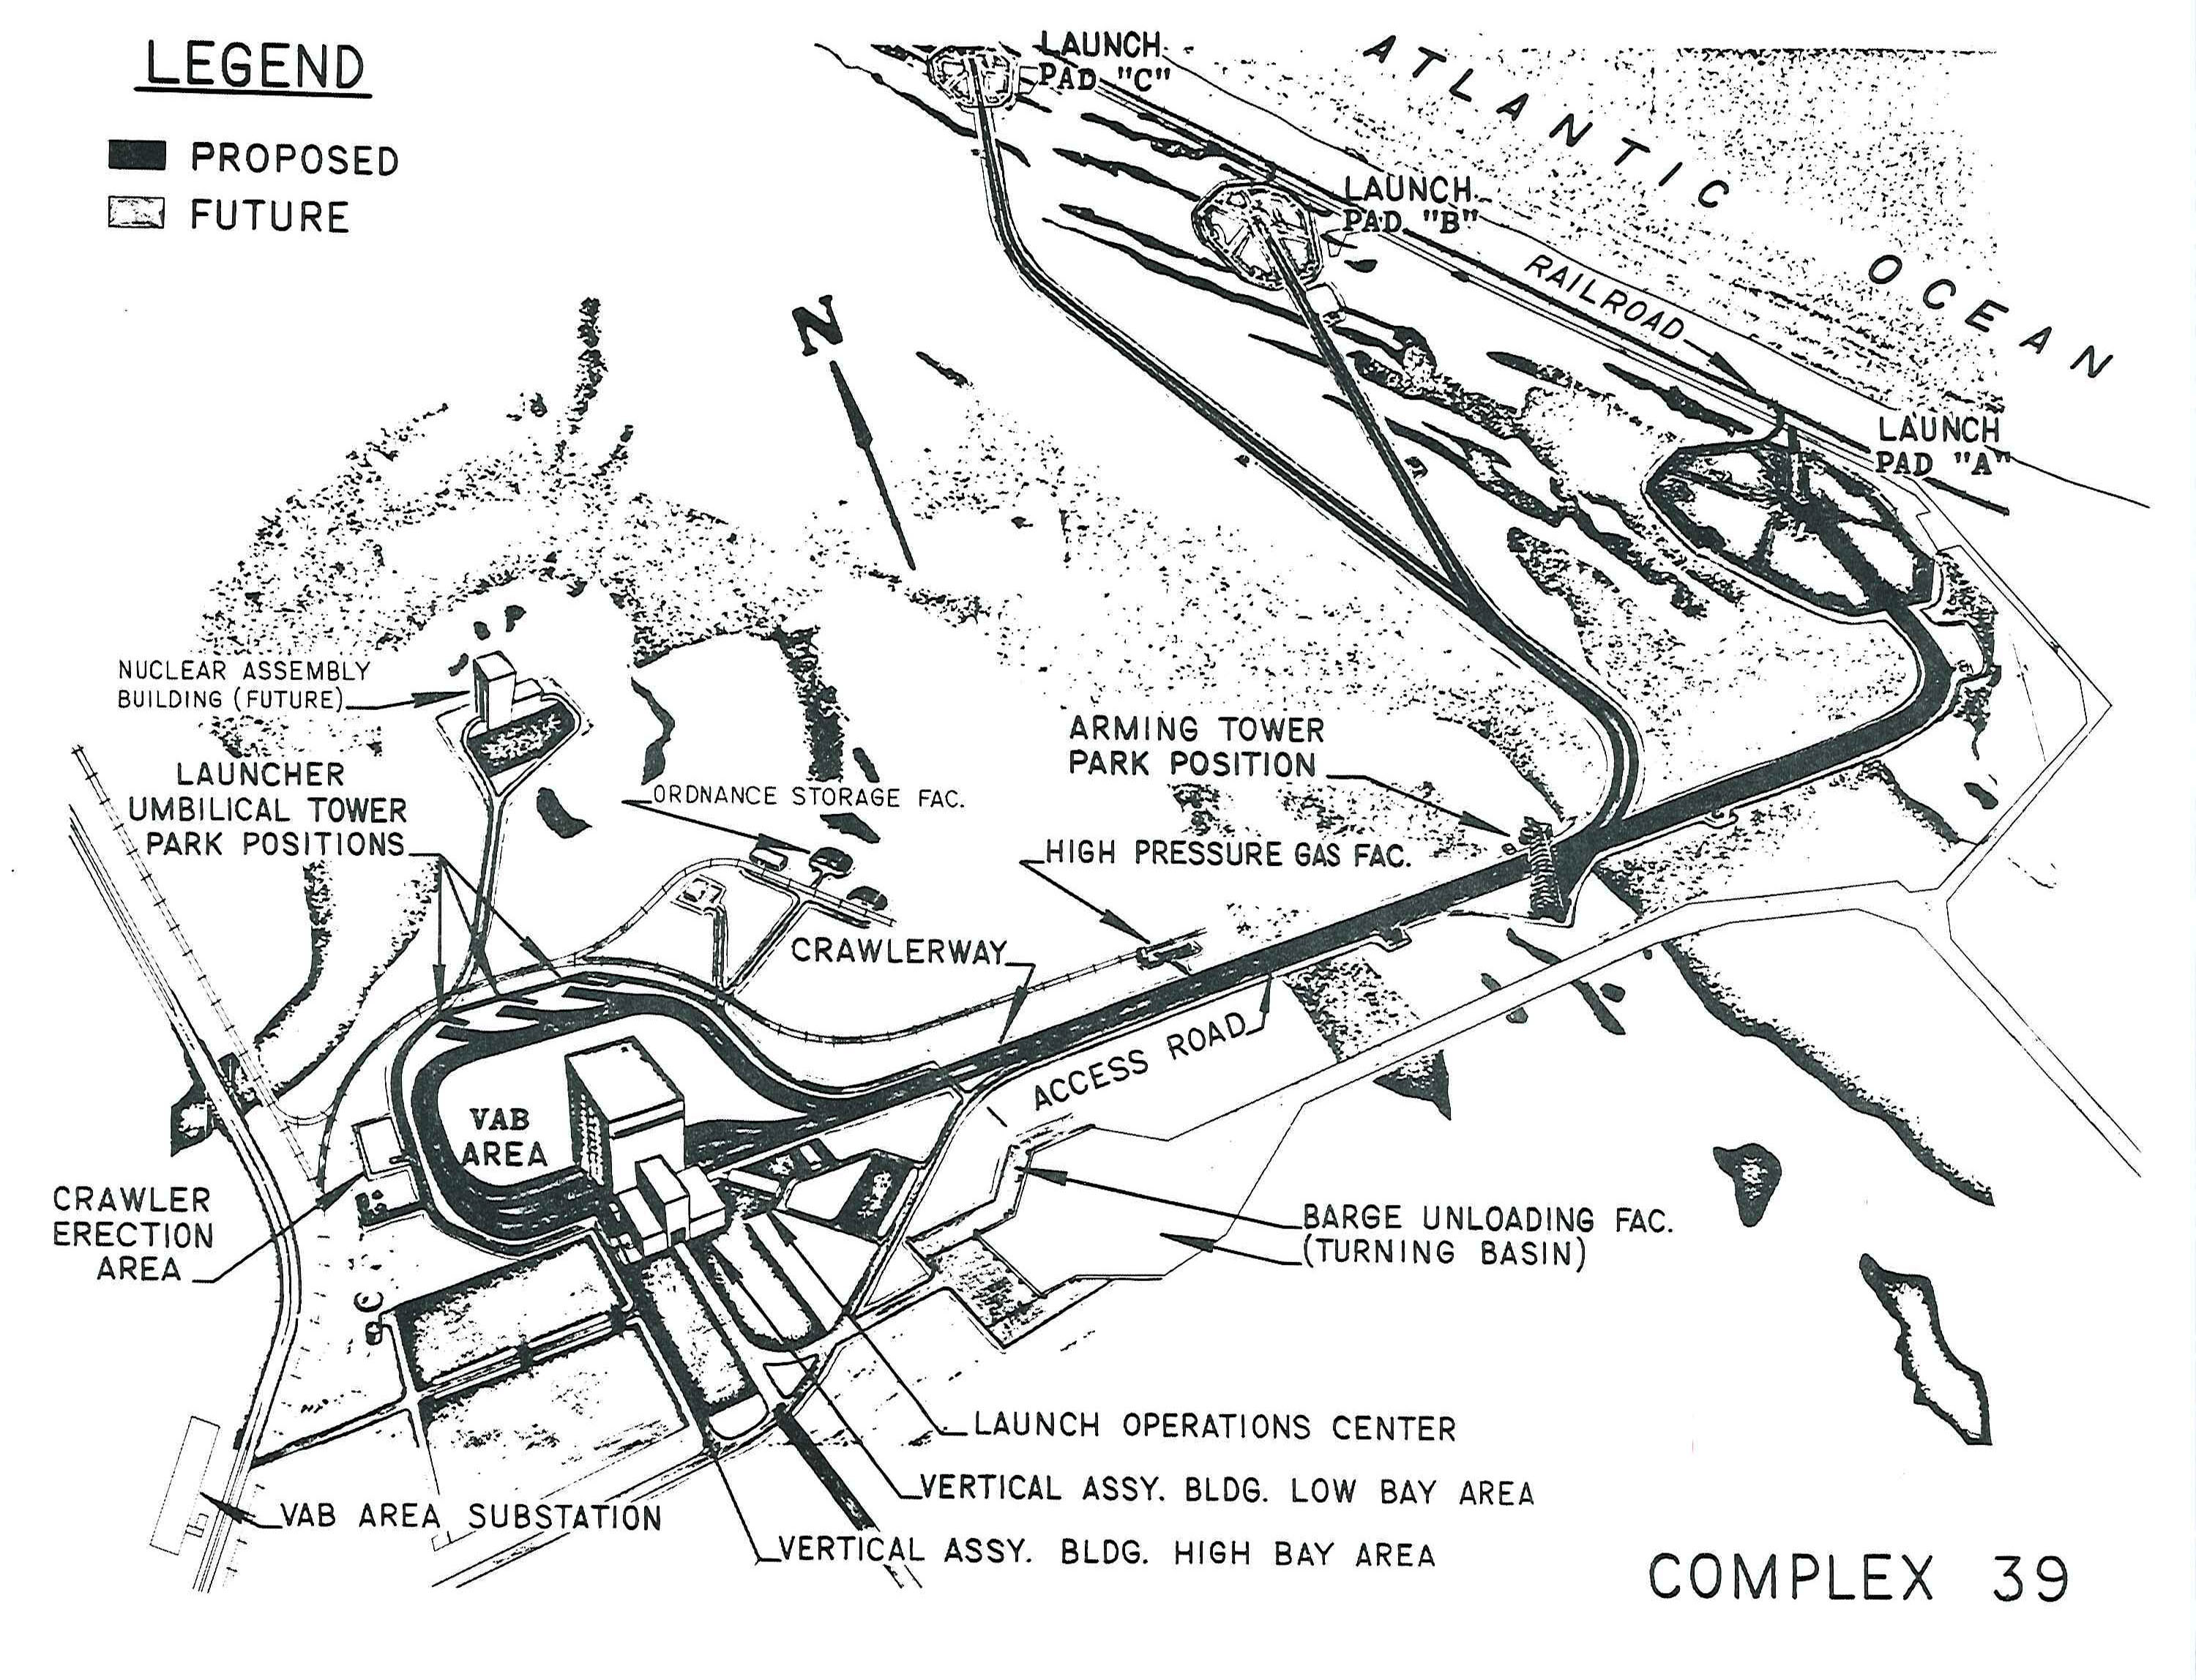 schematic drawing of launch complex 39